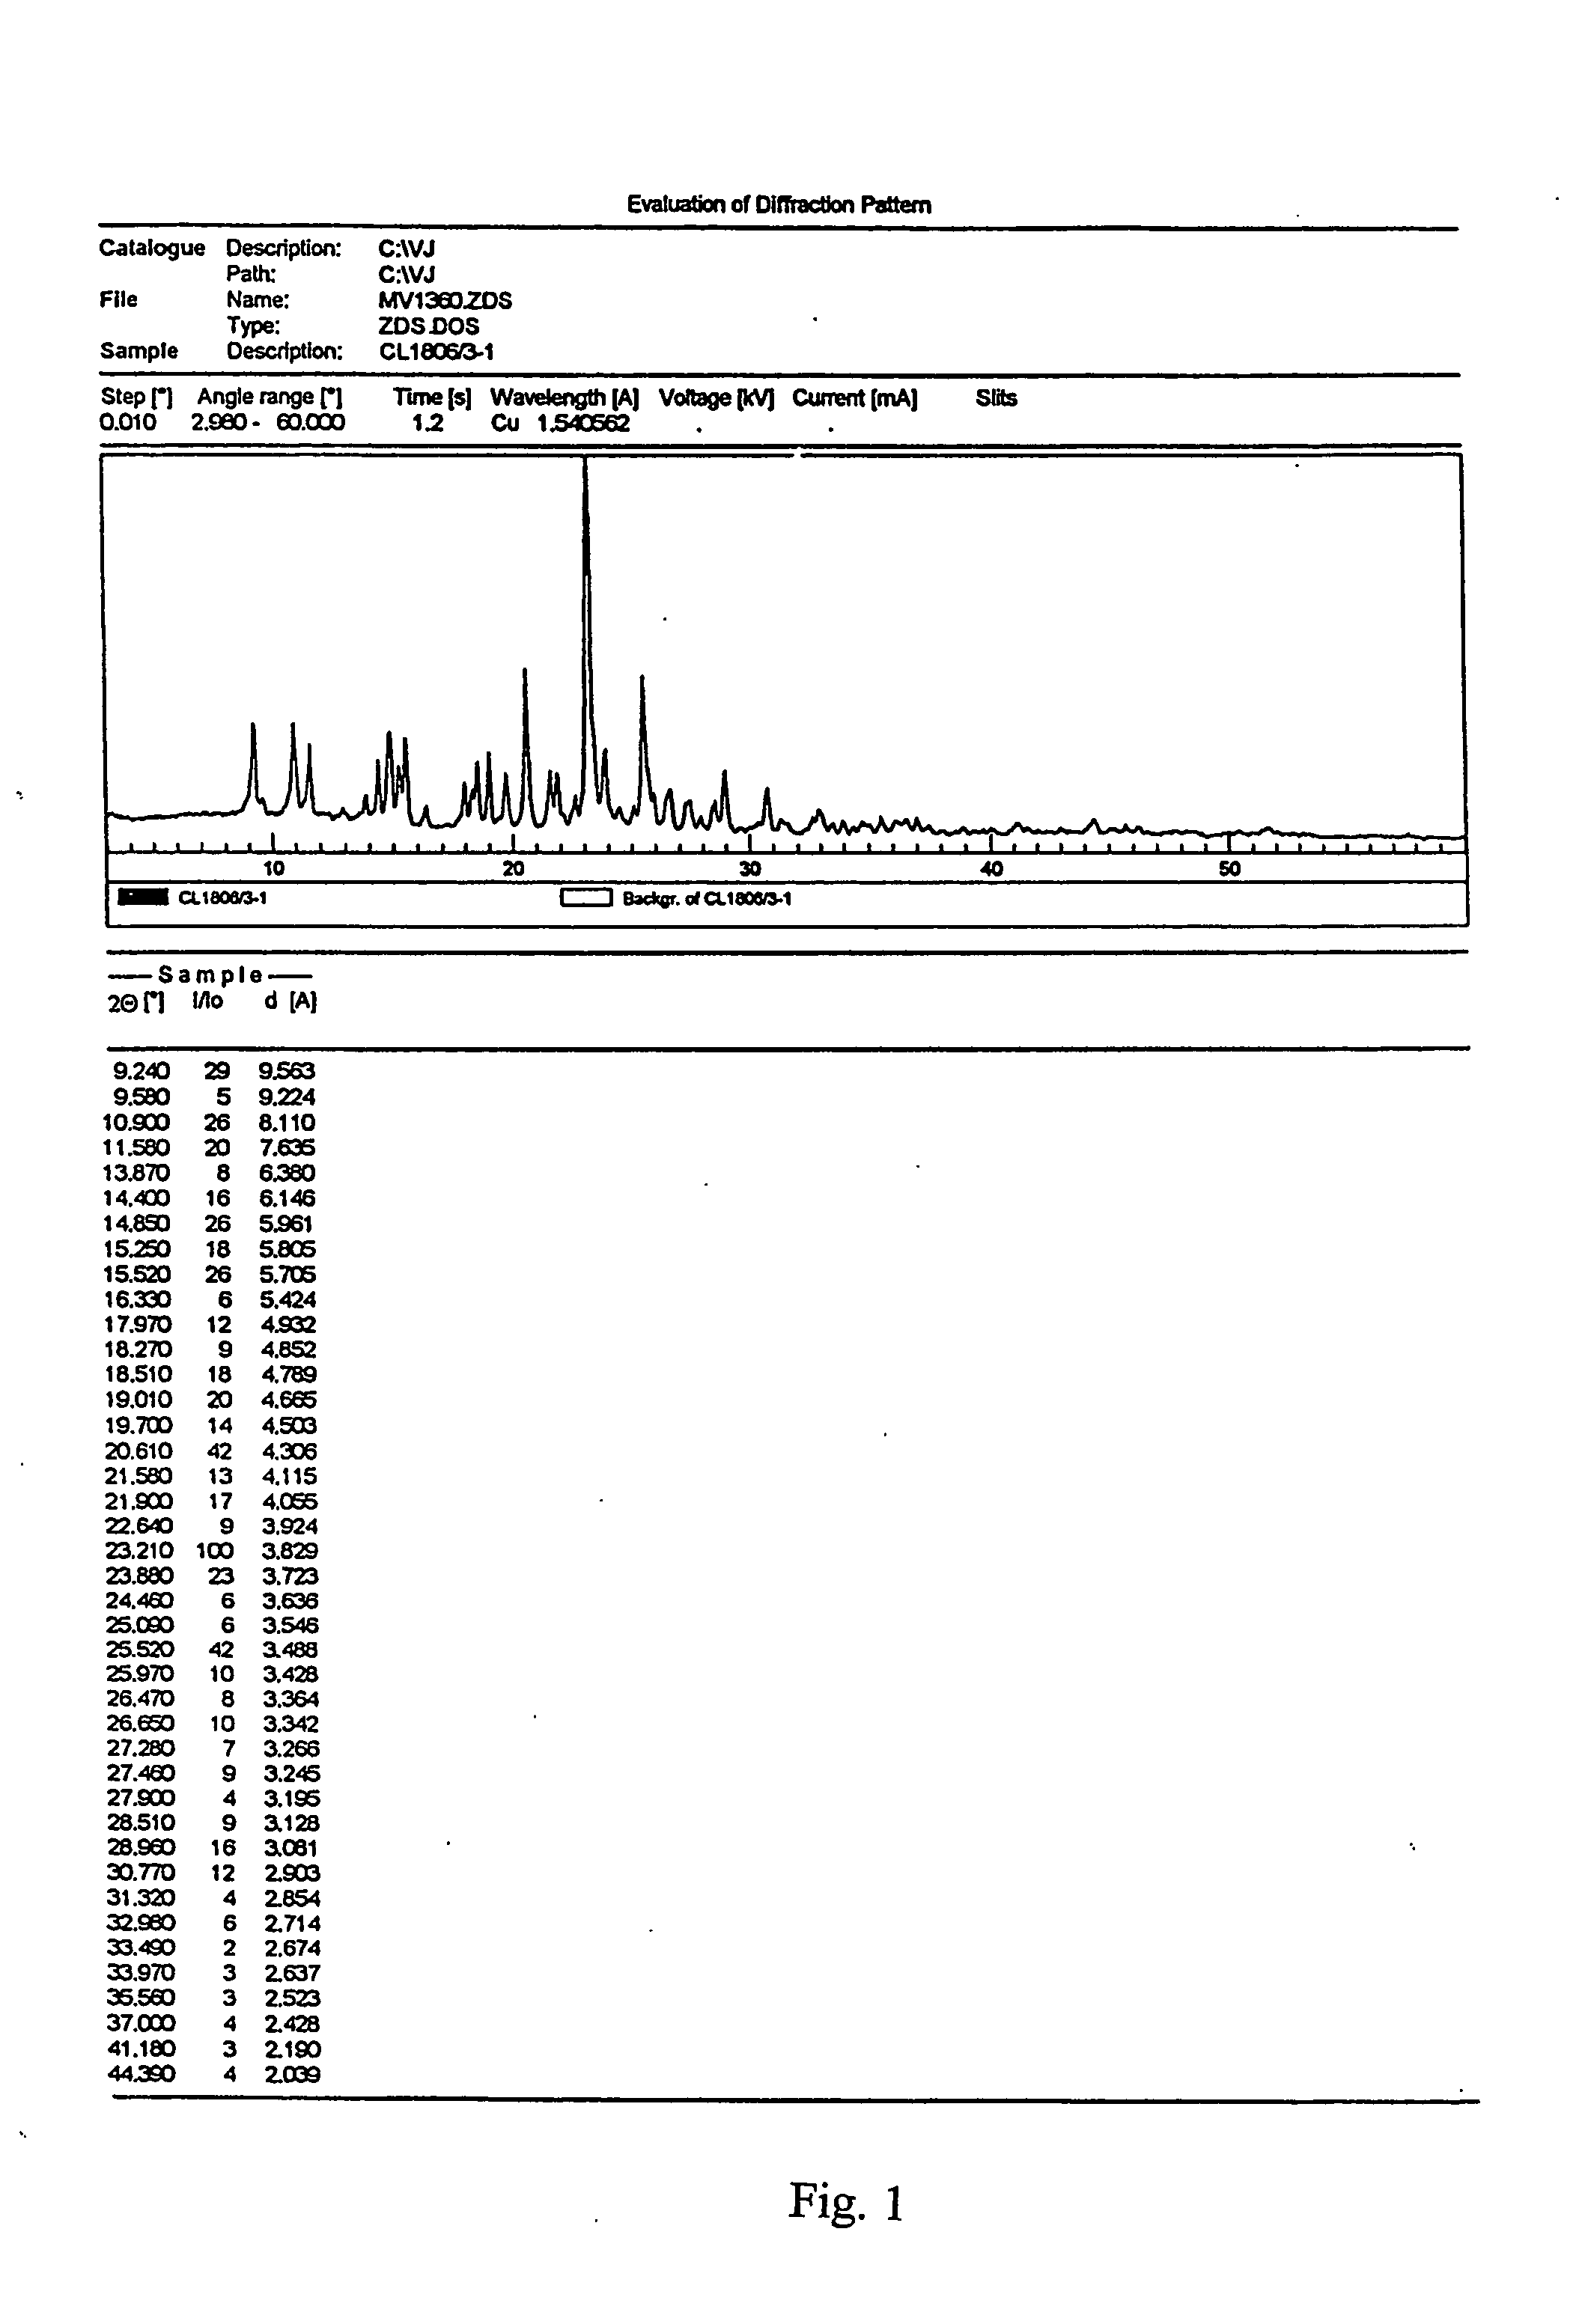 Method for manufacturing crystalline form I of clopidogrel hydrogen sulphate